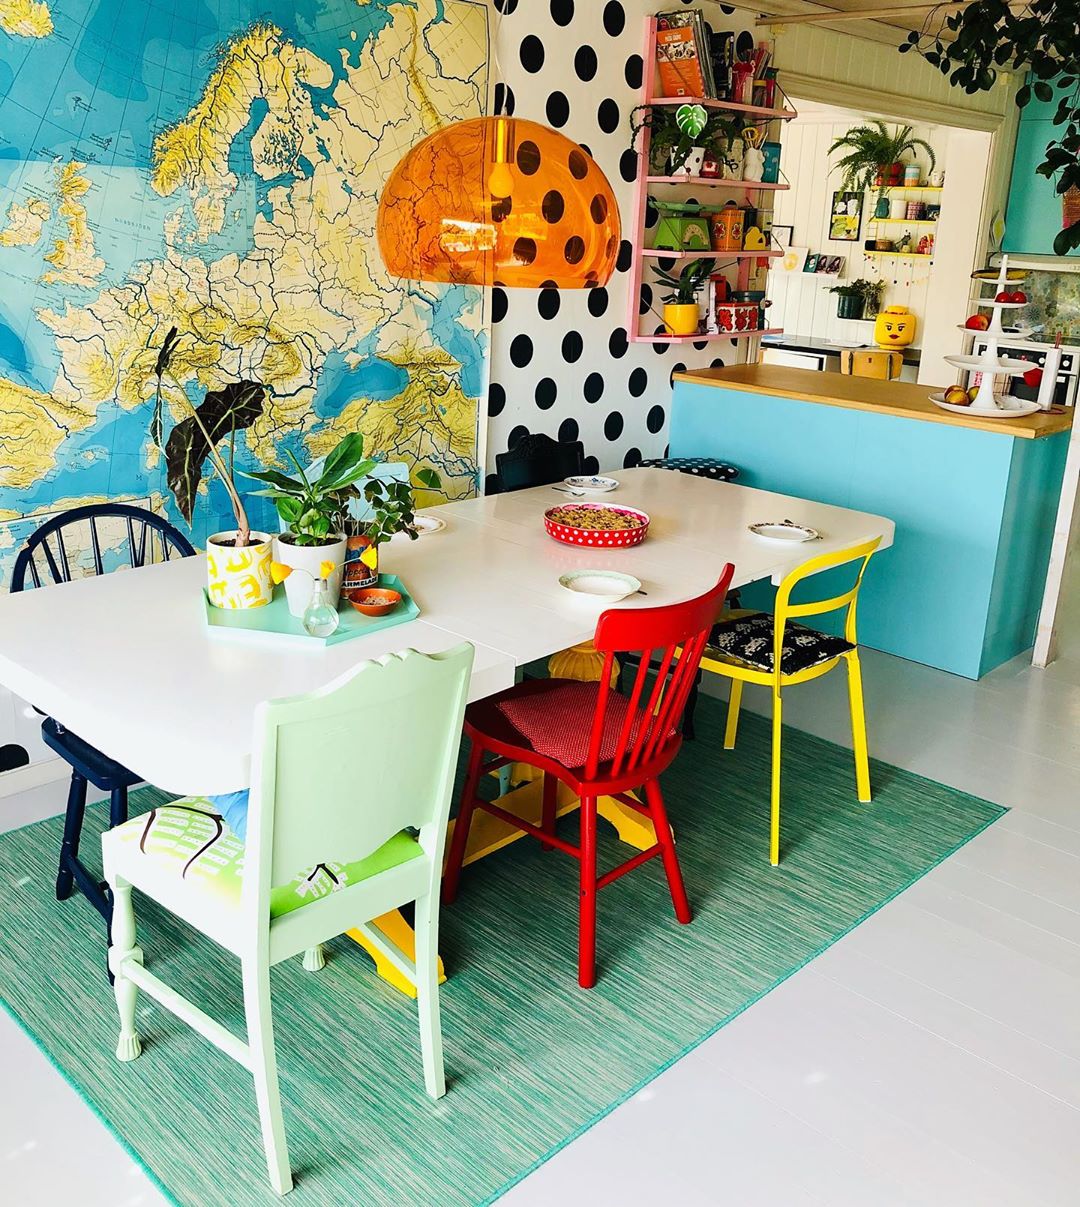 Kitchen with multicolored chairs and polkadot walls. Photo by Instagram user @polkadotgrid